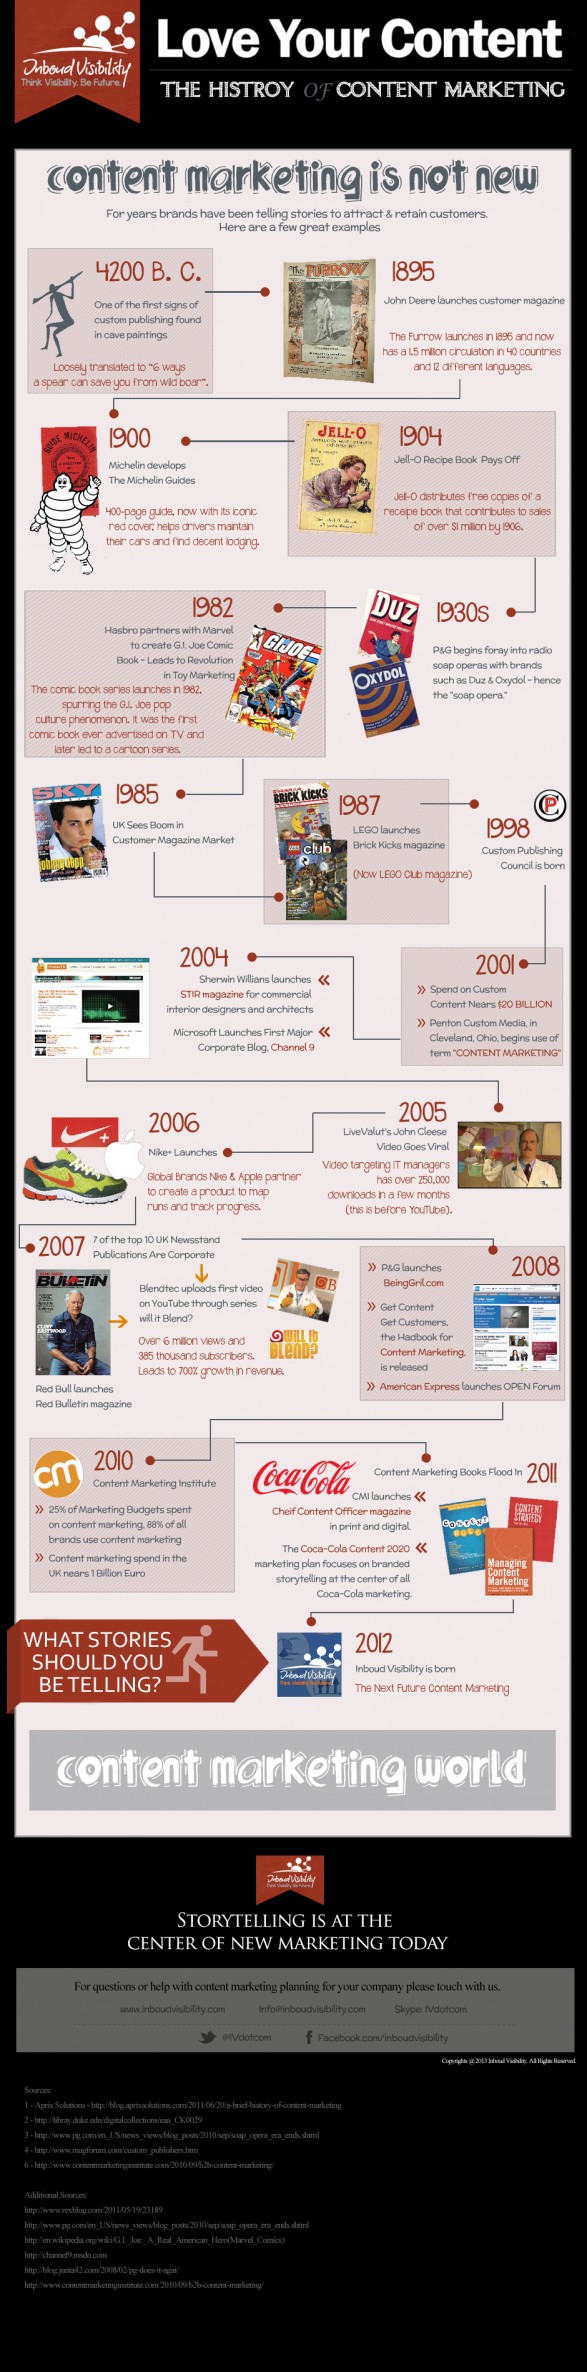 Love Your Content - History of Content Marketing World